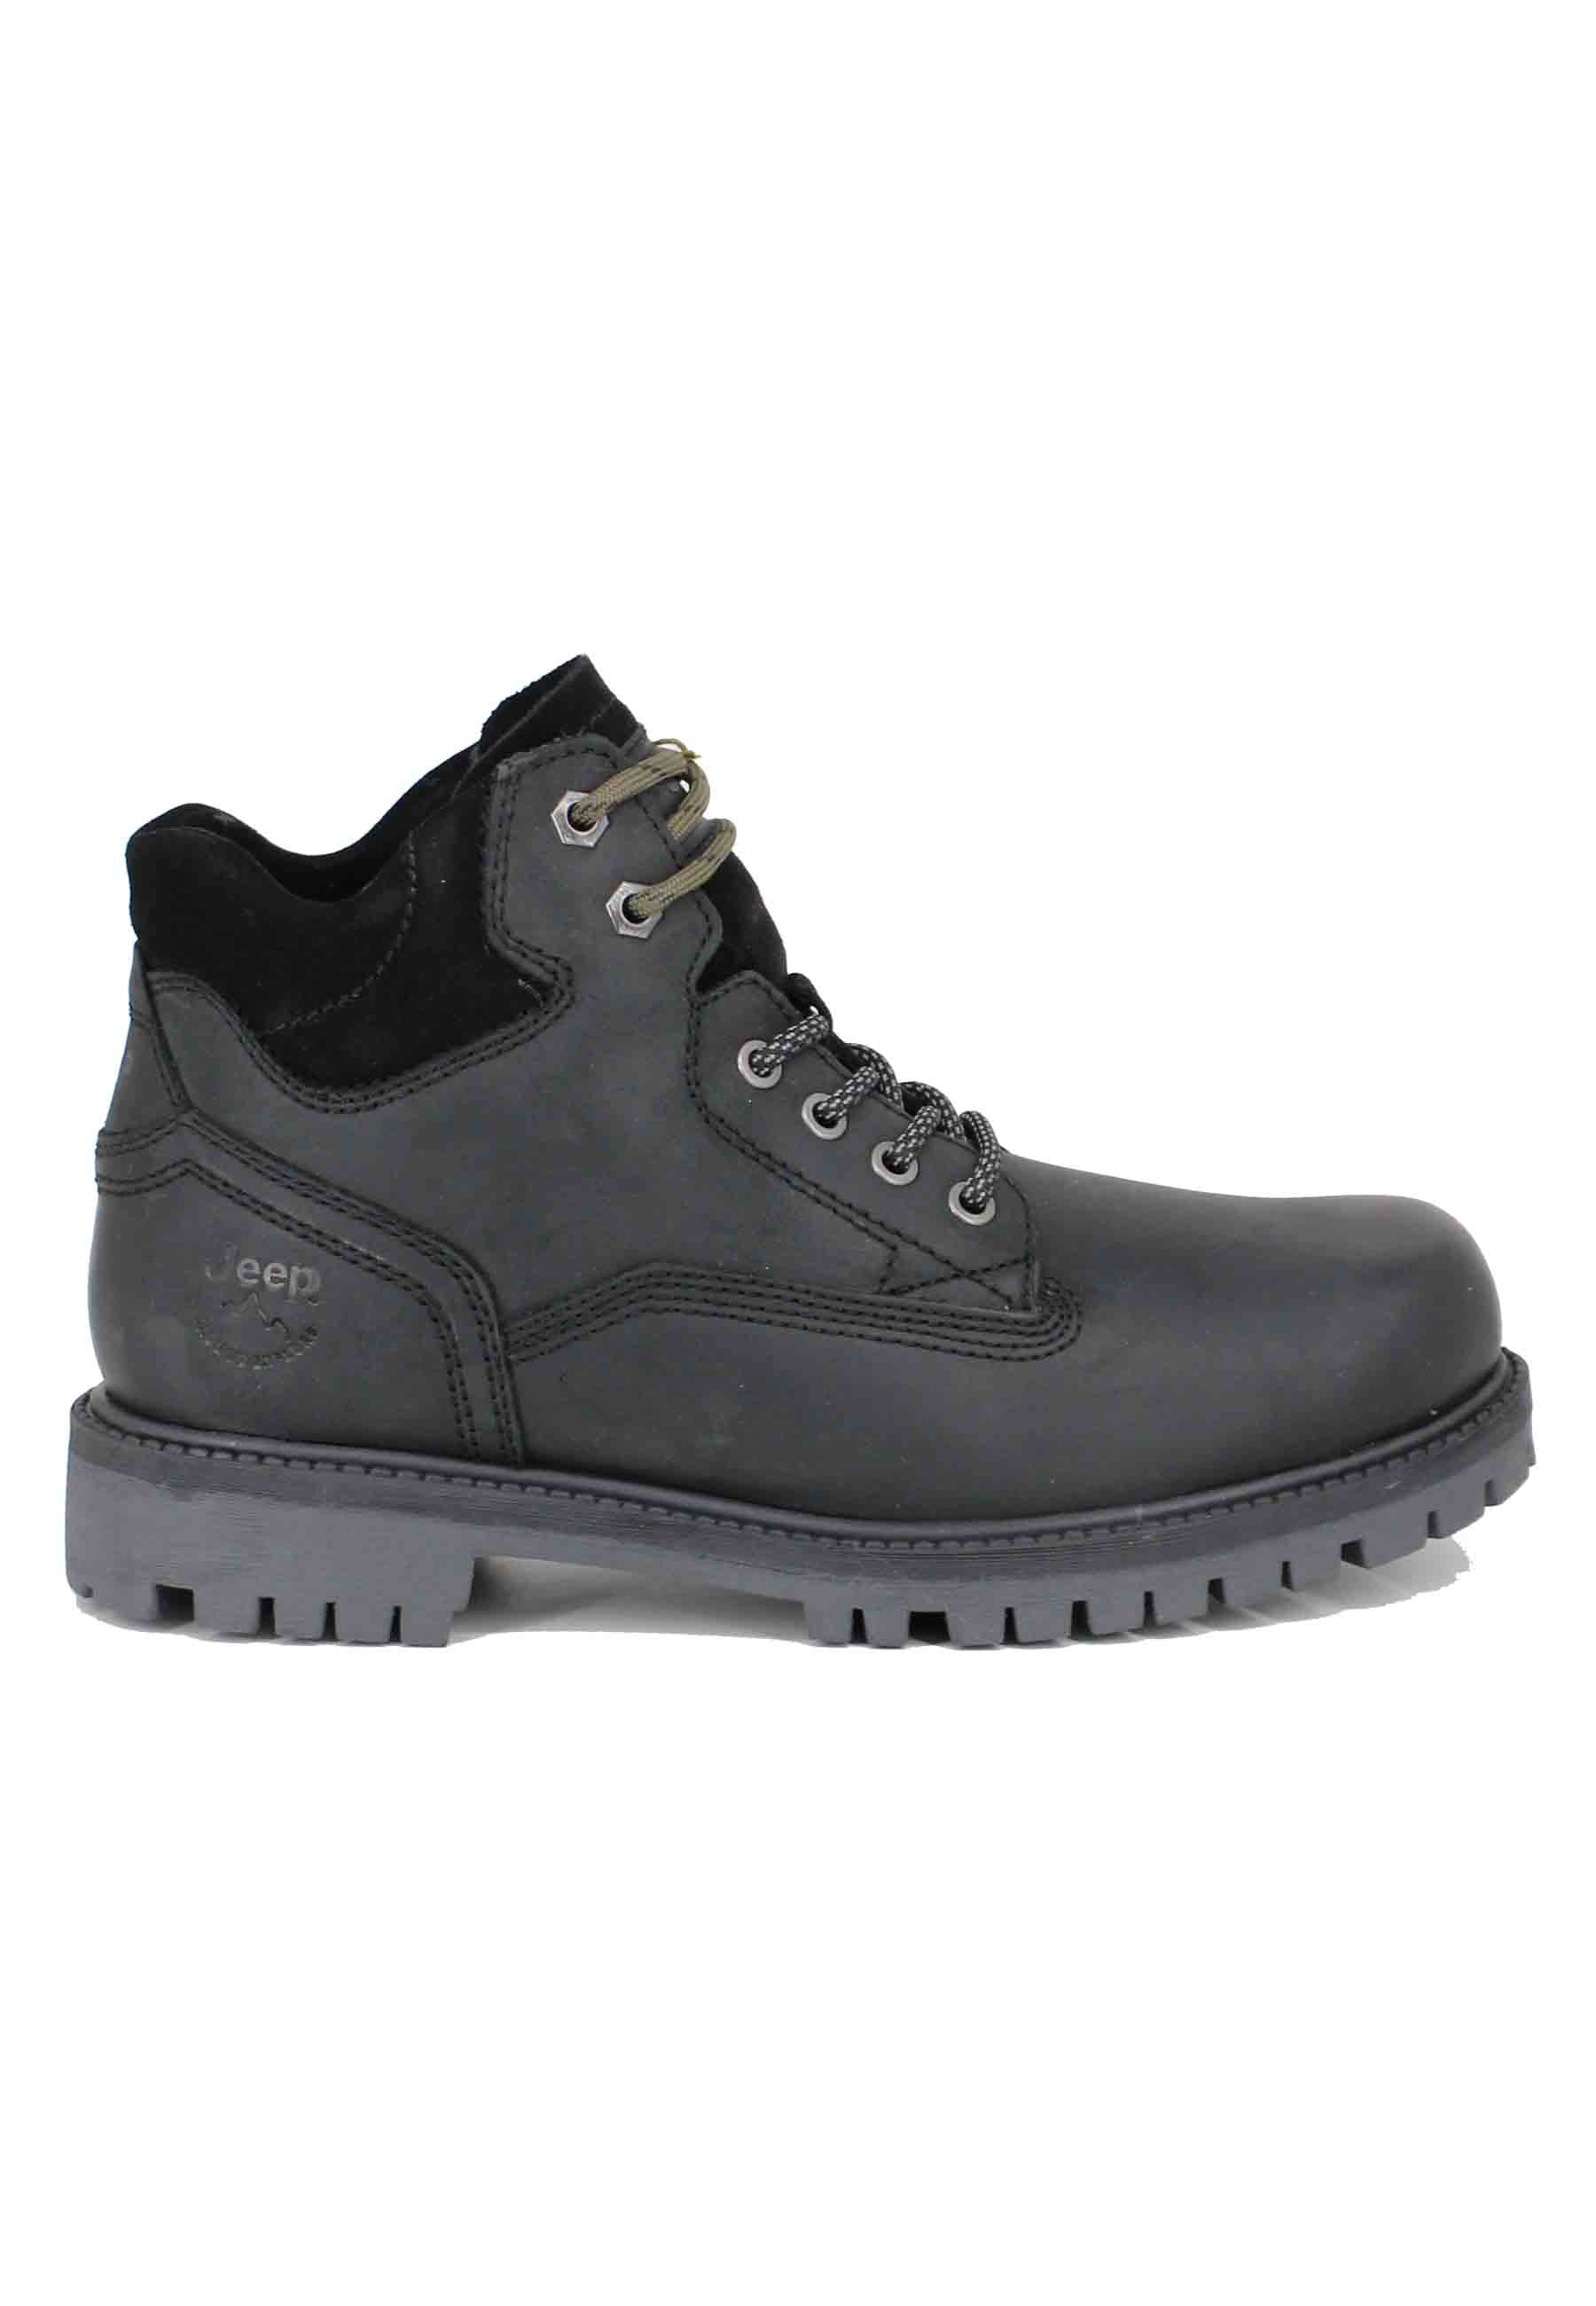 Willys men's traking boots in black oiled leather